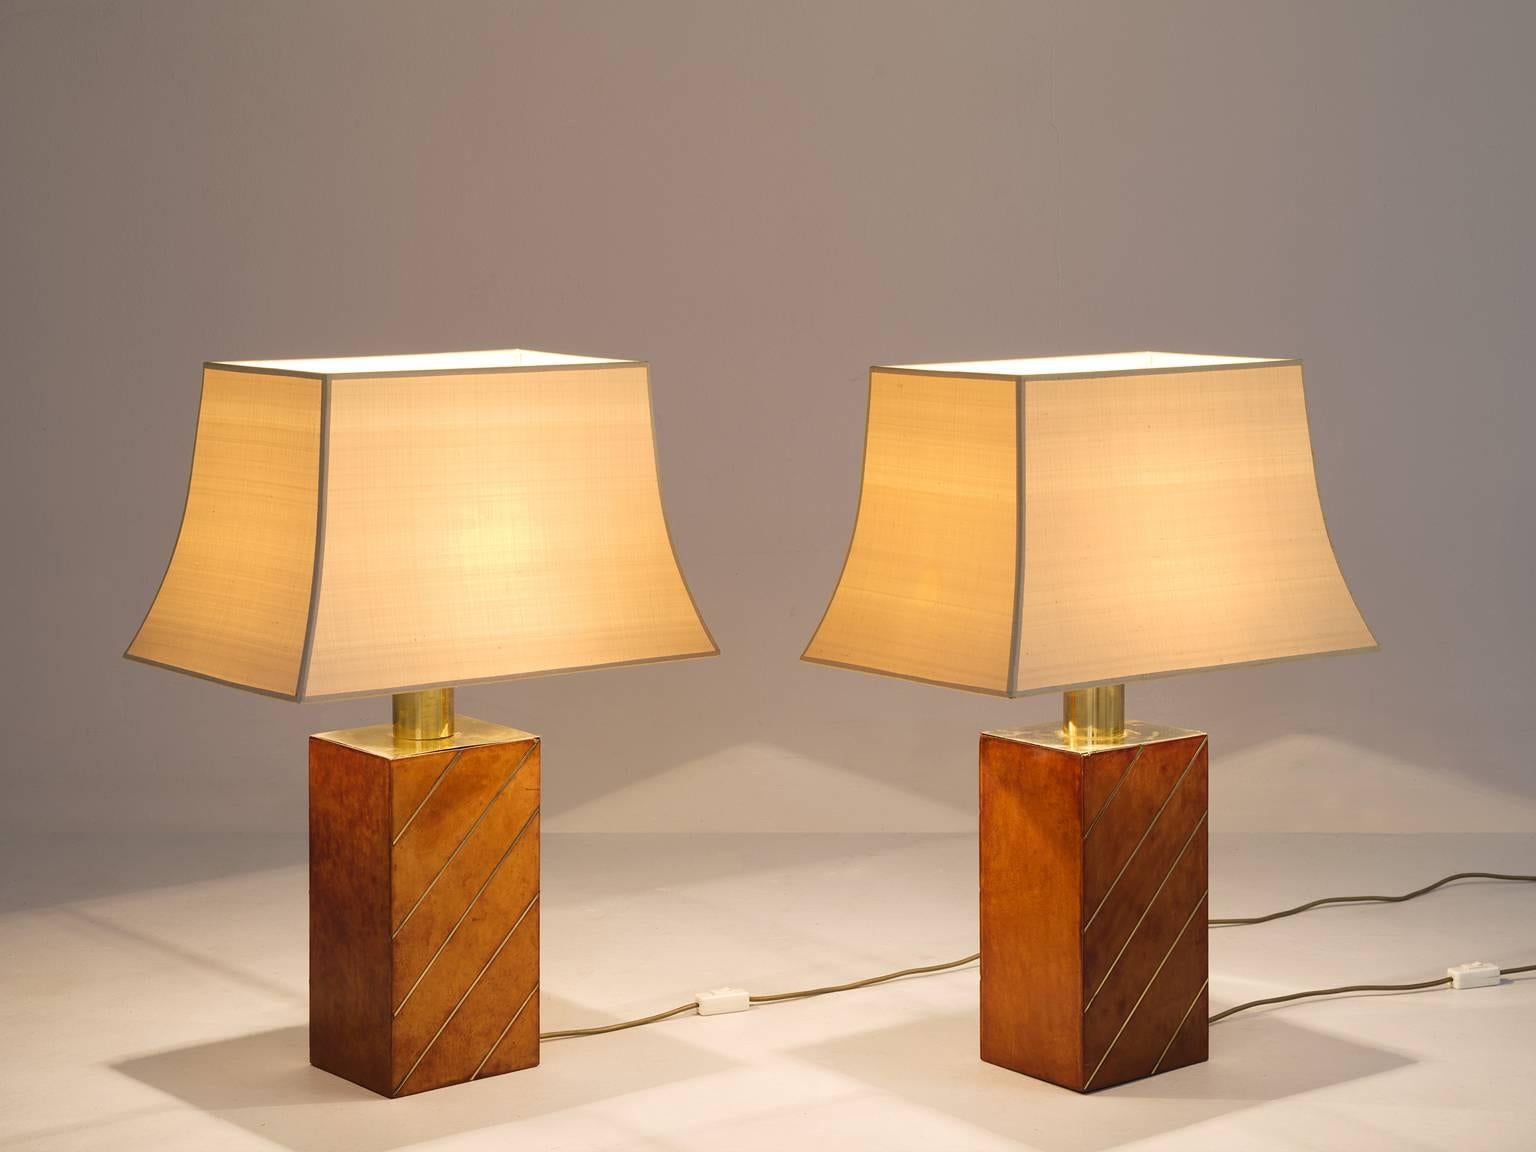 Pair of table lamps, in leather brass and fabric, Europe, 1970s. 

Nice pair of table lamps with beautiful leather wrapped base. The cognac leather beautifully combines with the brass colored fixture. The off-white fabric shade is a nice addition